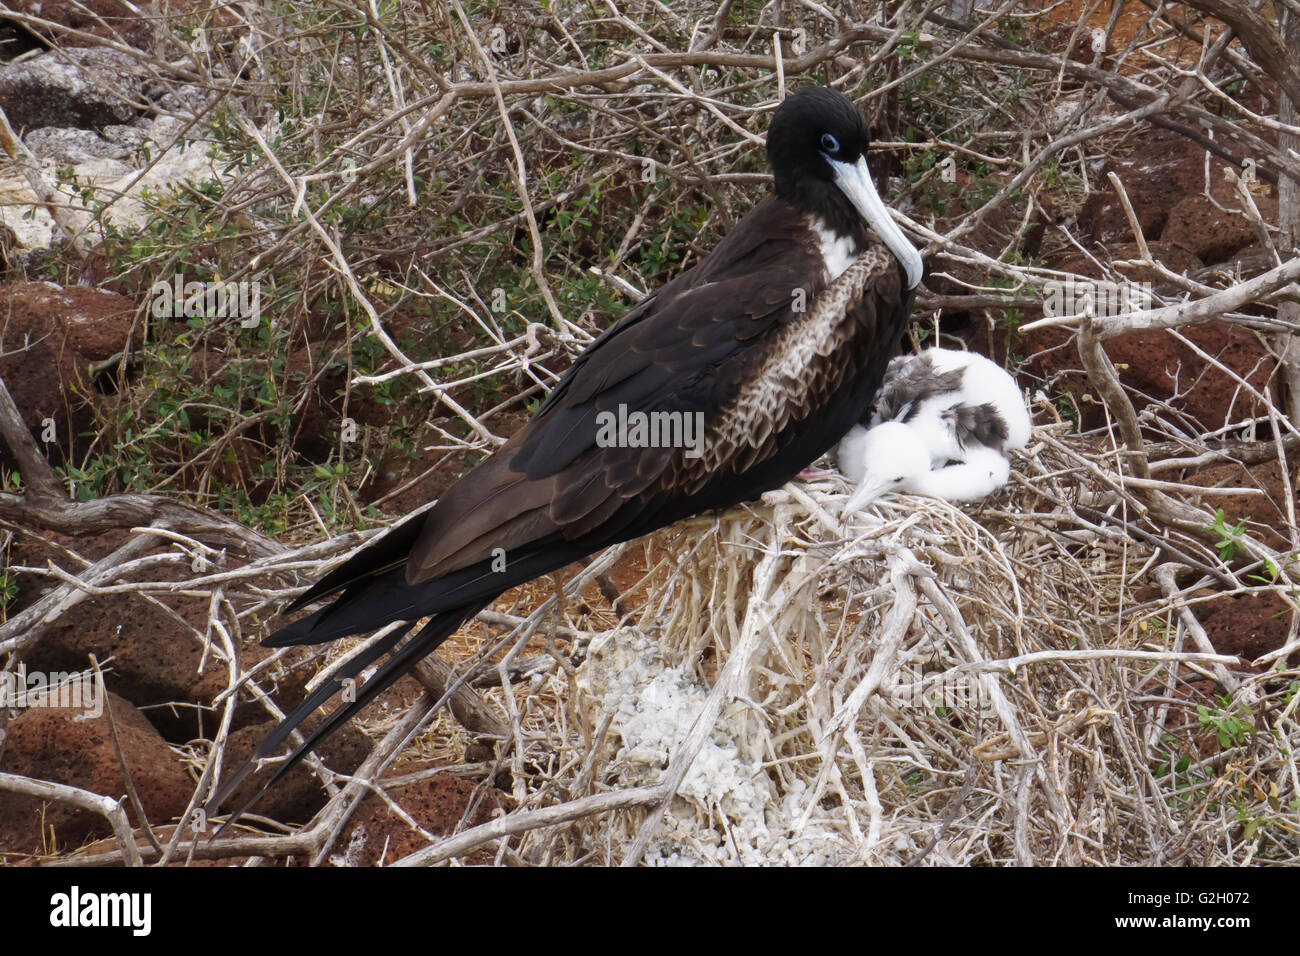 female Magnificent Frigatebird with chick in its nest (Fregata magnificens). Photographed in the Galapagos Island, Ecuador Stock Photo